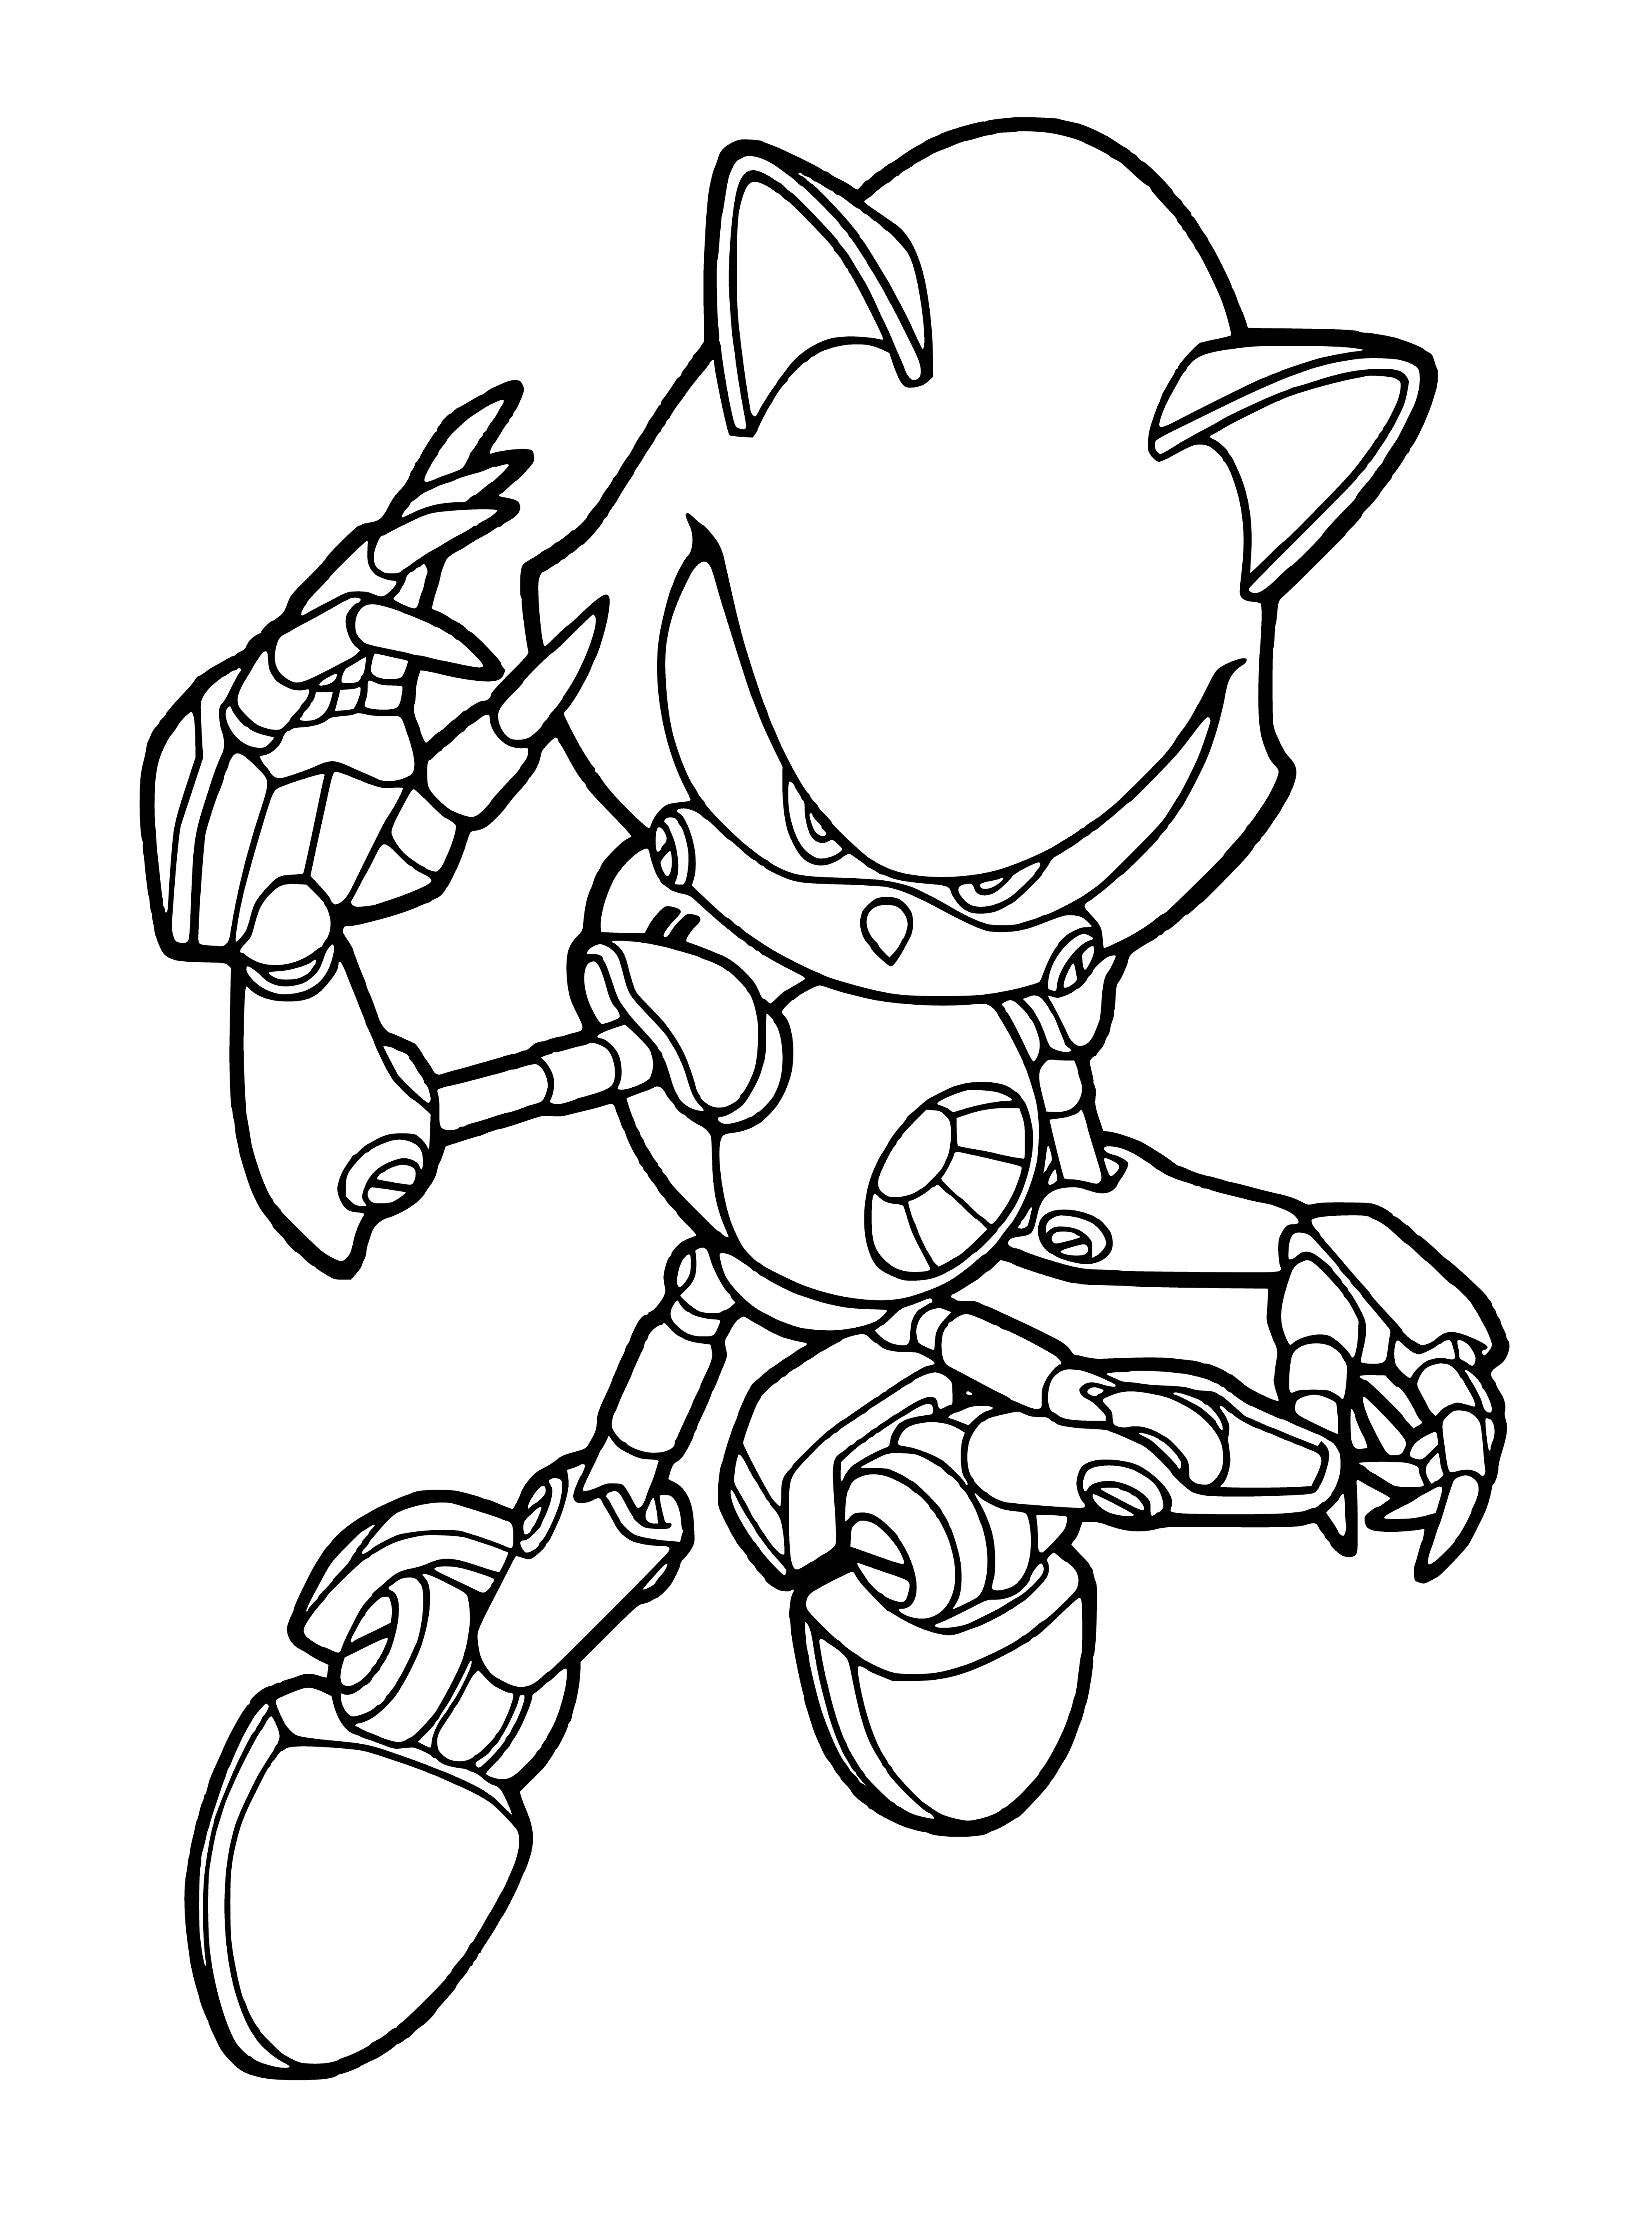 coloring page: Sonic must use his speed and agility to stop Dr. Eggman and his robot Metal Sonic from building the Death Egg in this 3D platformer.